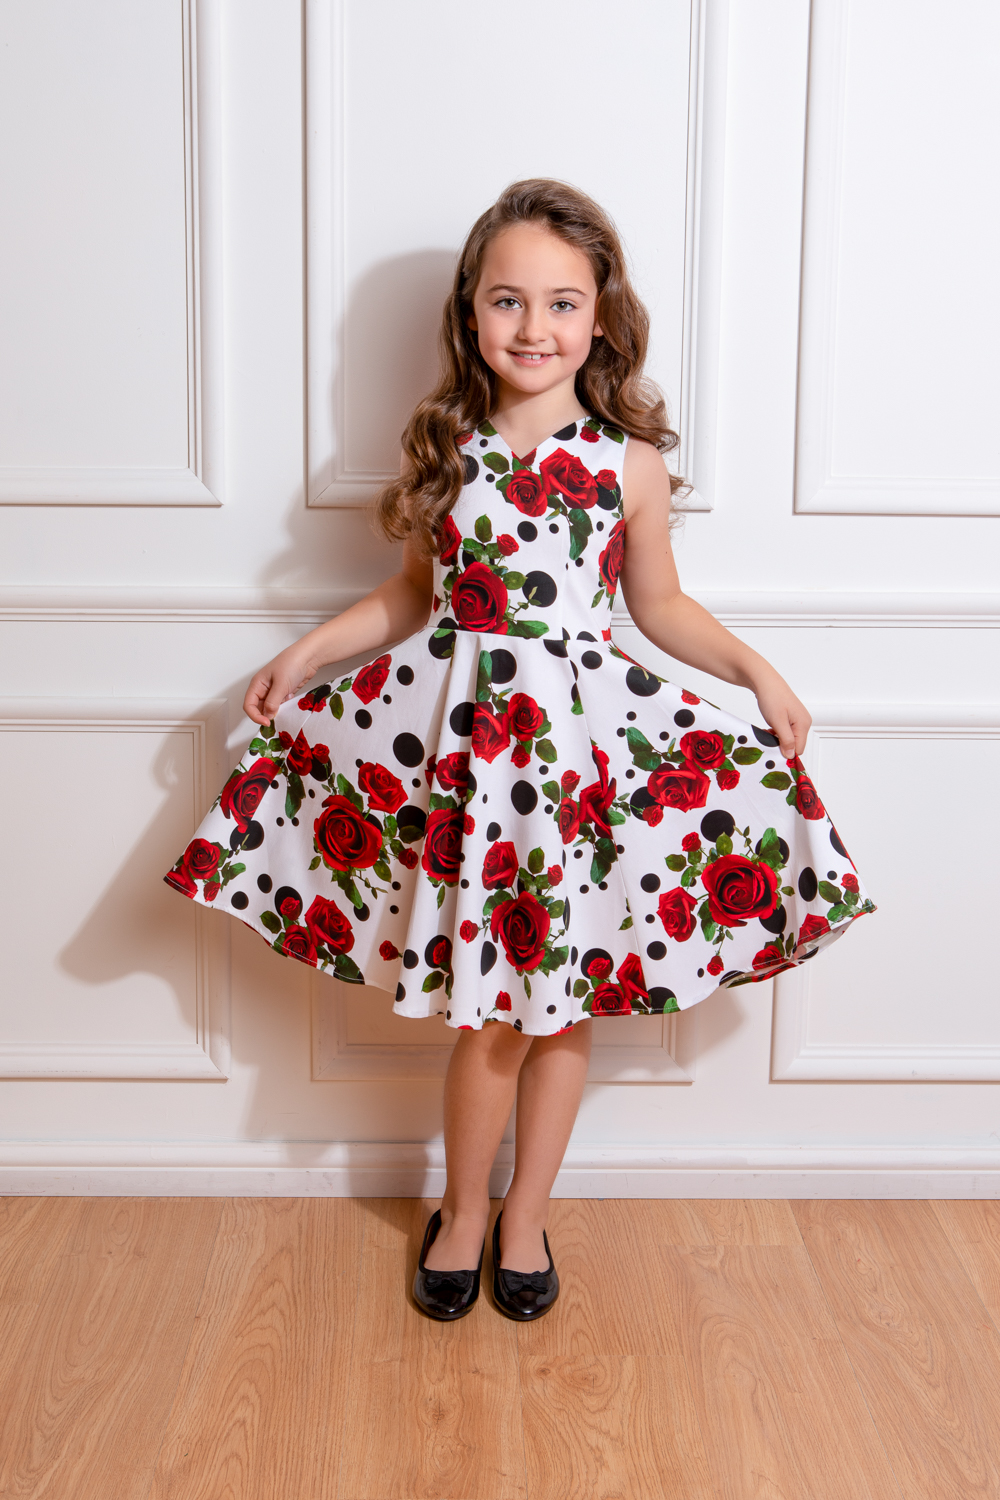 Buy HARRICA Fashion Girls Dress Kids Floral Digitally Printed Satin Lycra  Blend Sleeveless Frock Party Dress Casual Dress for 2-6 Years Kids (4-5  Years, Black & White) at Amazon.in